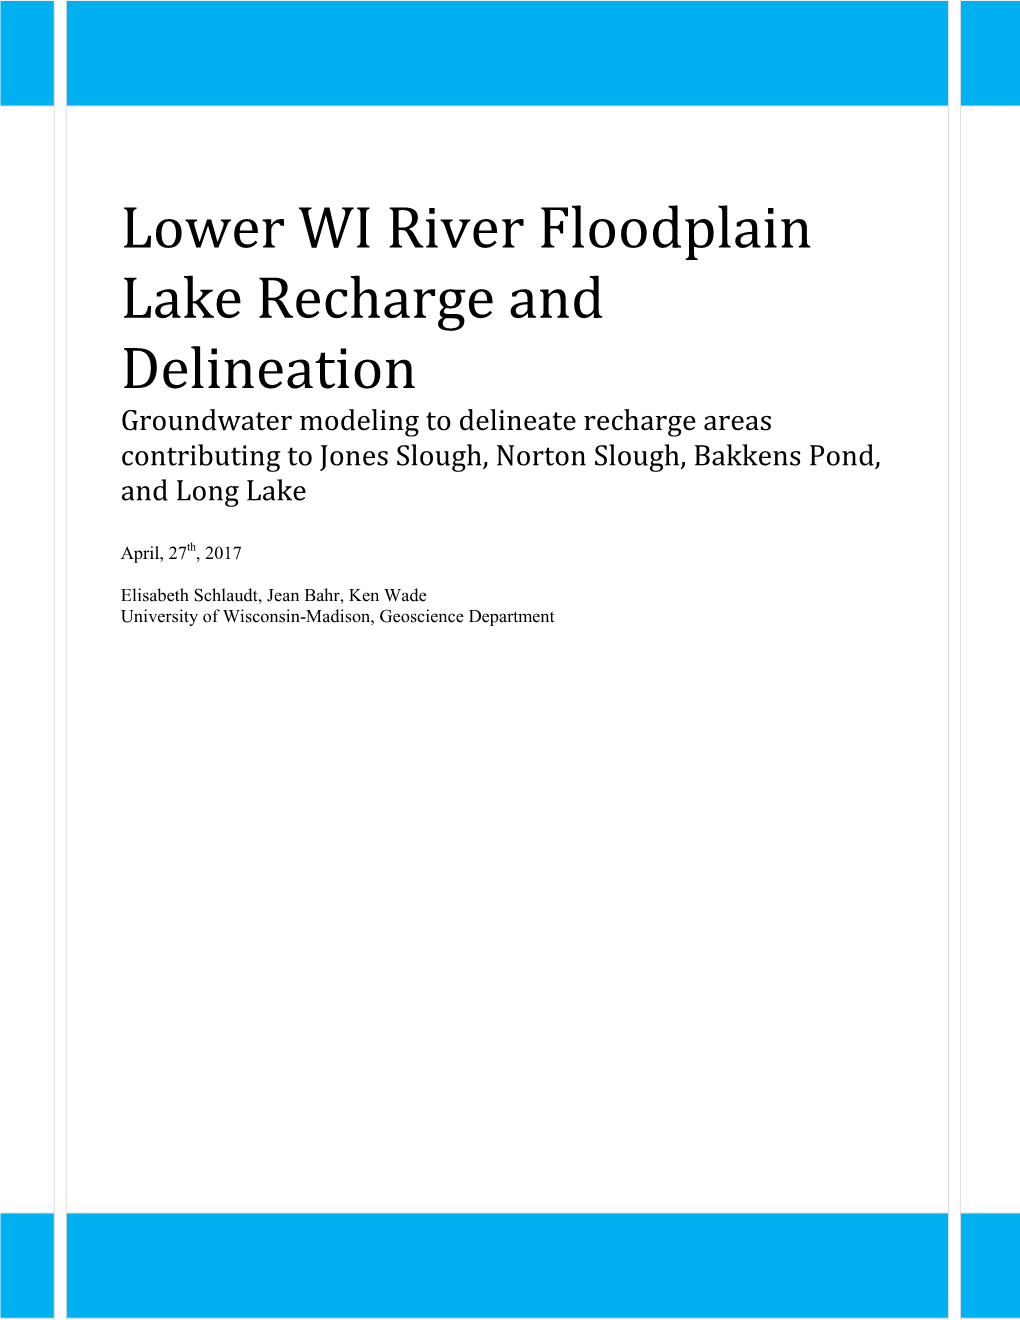 Lower WI River Floodplain Lake Recharge and Delineation